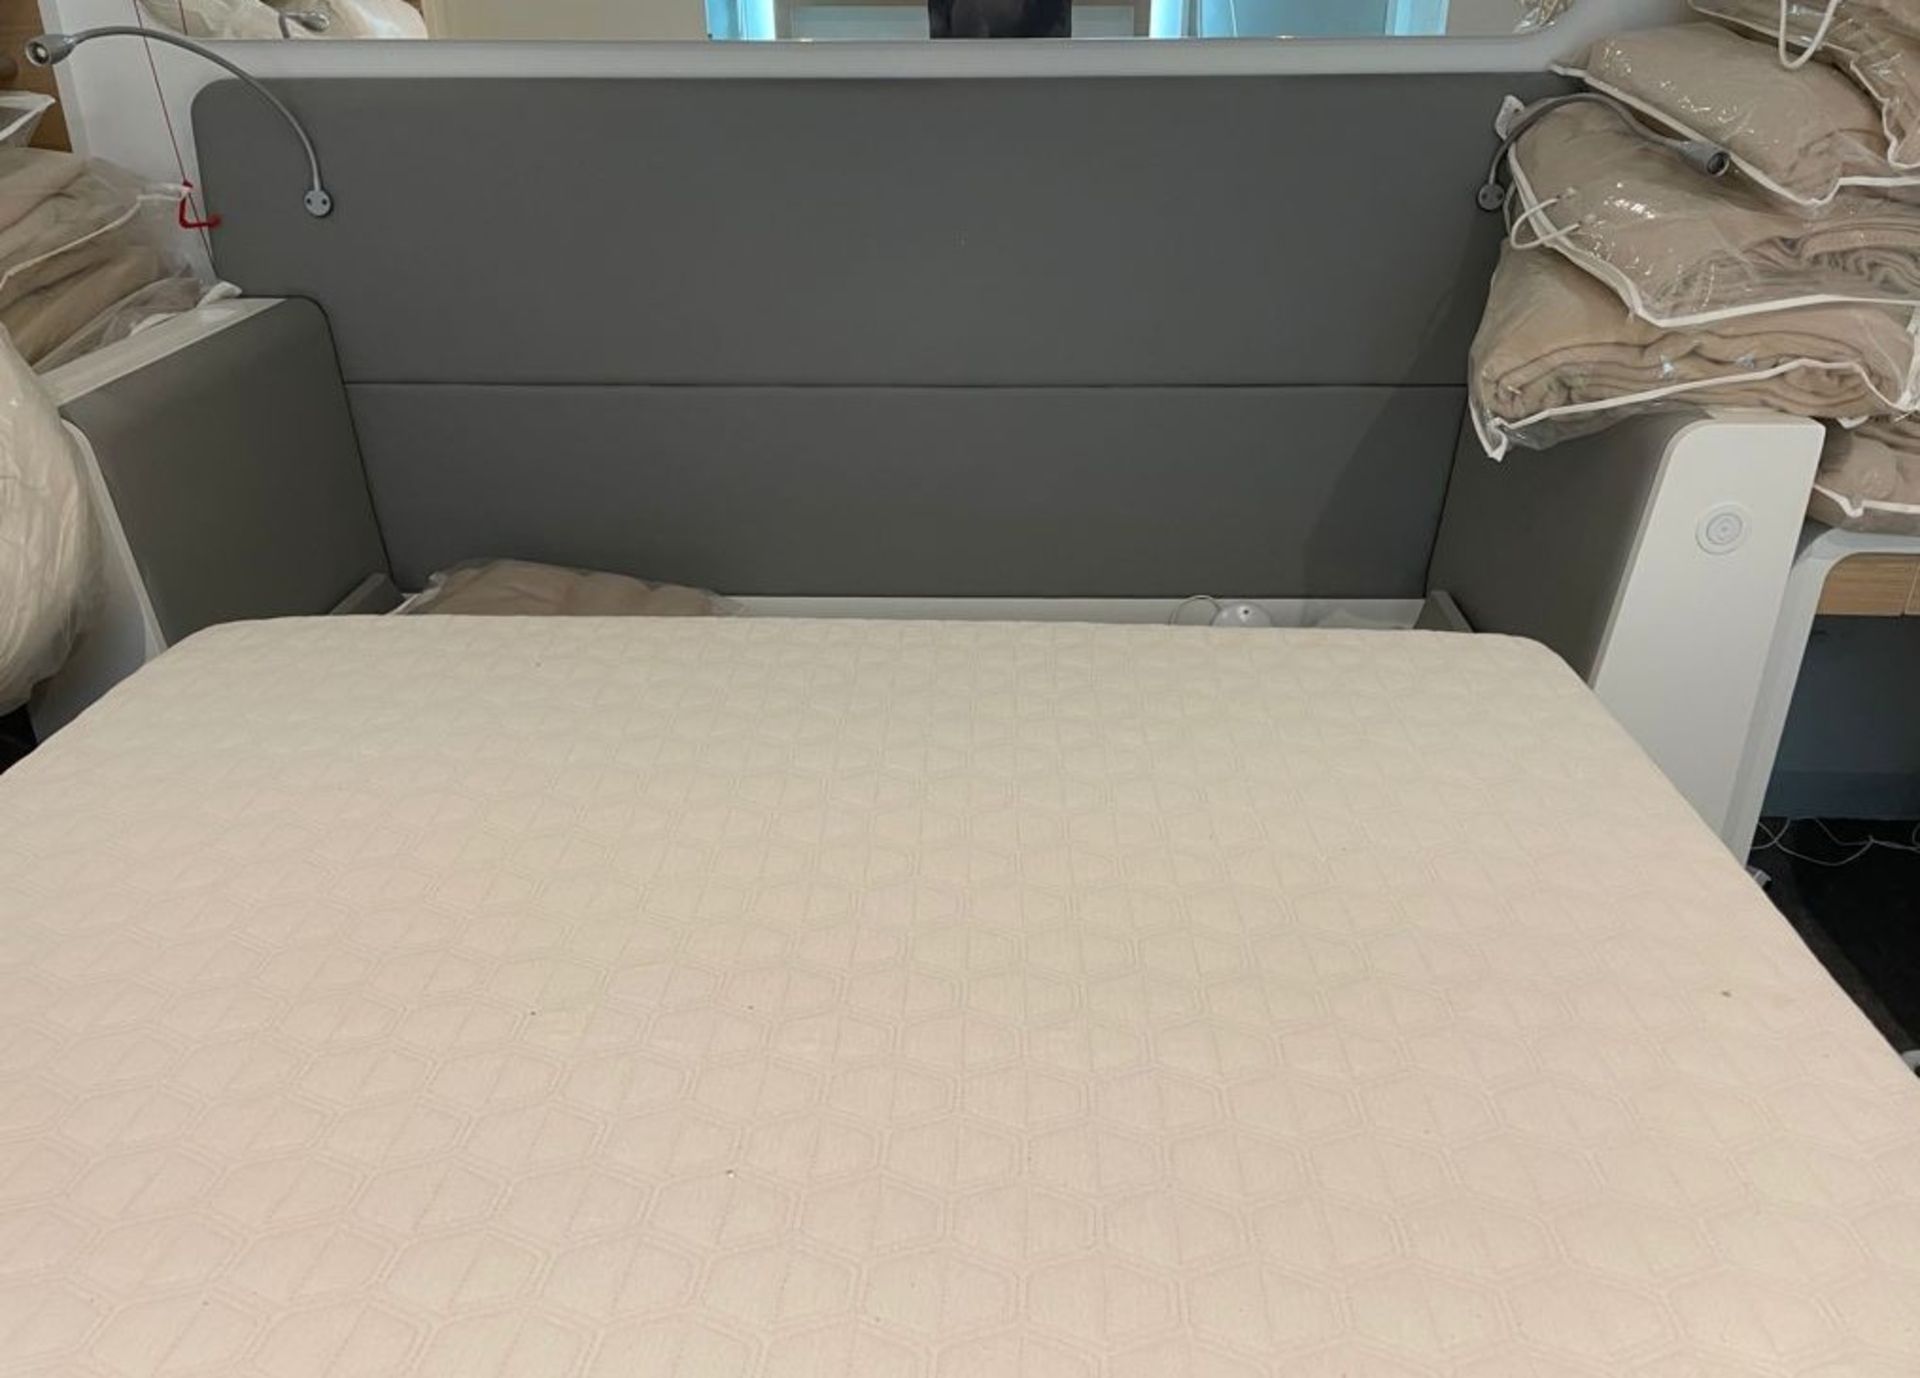 1 x Double Adjustable Space Saving Smart Bed With Serta Motion Memory Foam Mattress! - Image 11 of 11